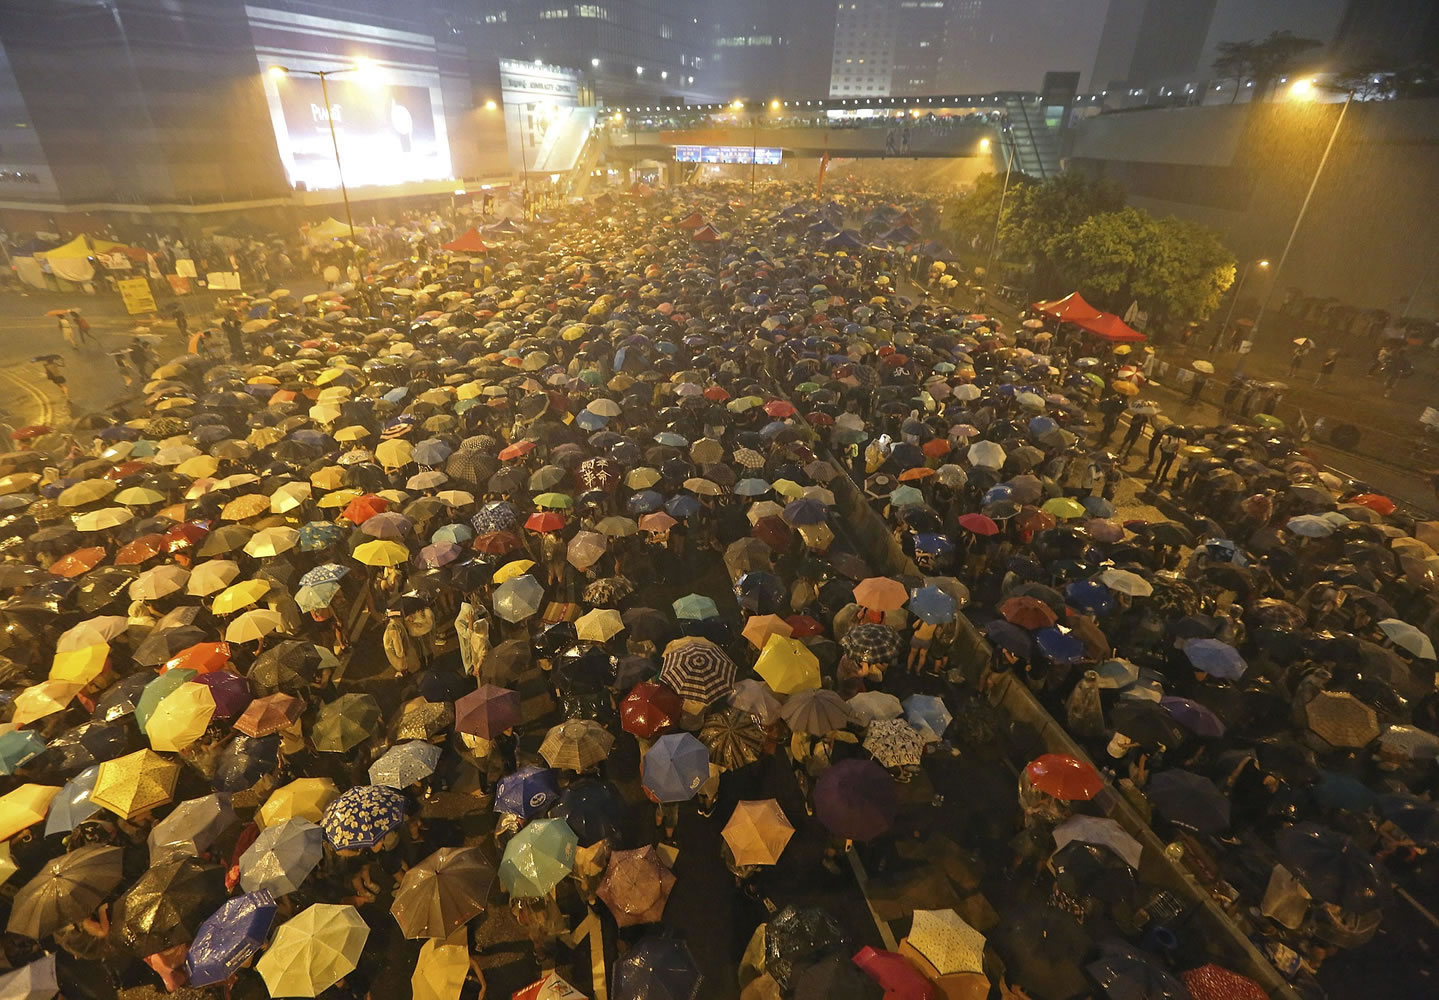 Pro-democracy protesters hold umbrellas under heavy rain in a main street near the government headquarters in Hong Kong late Tuesday.